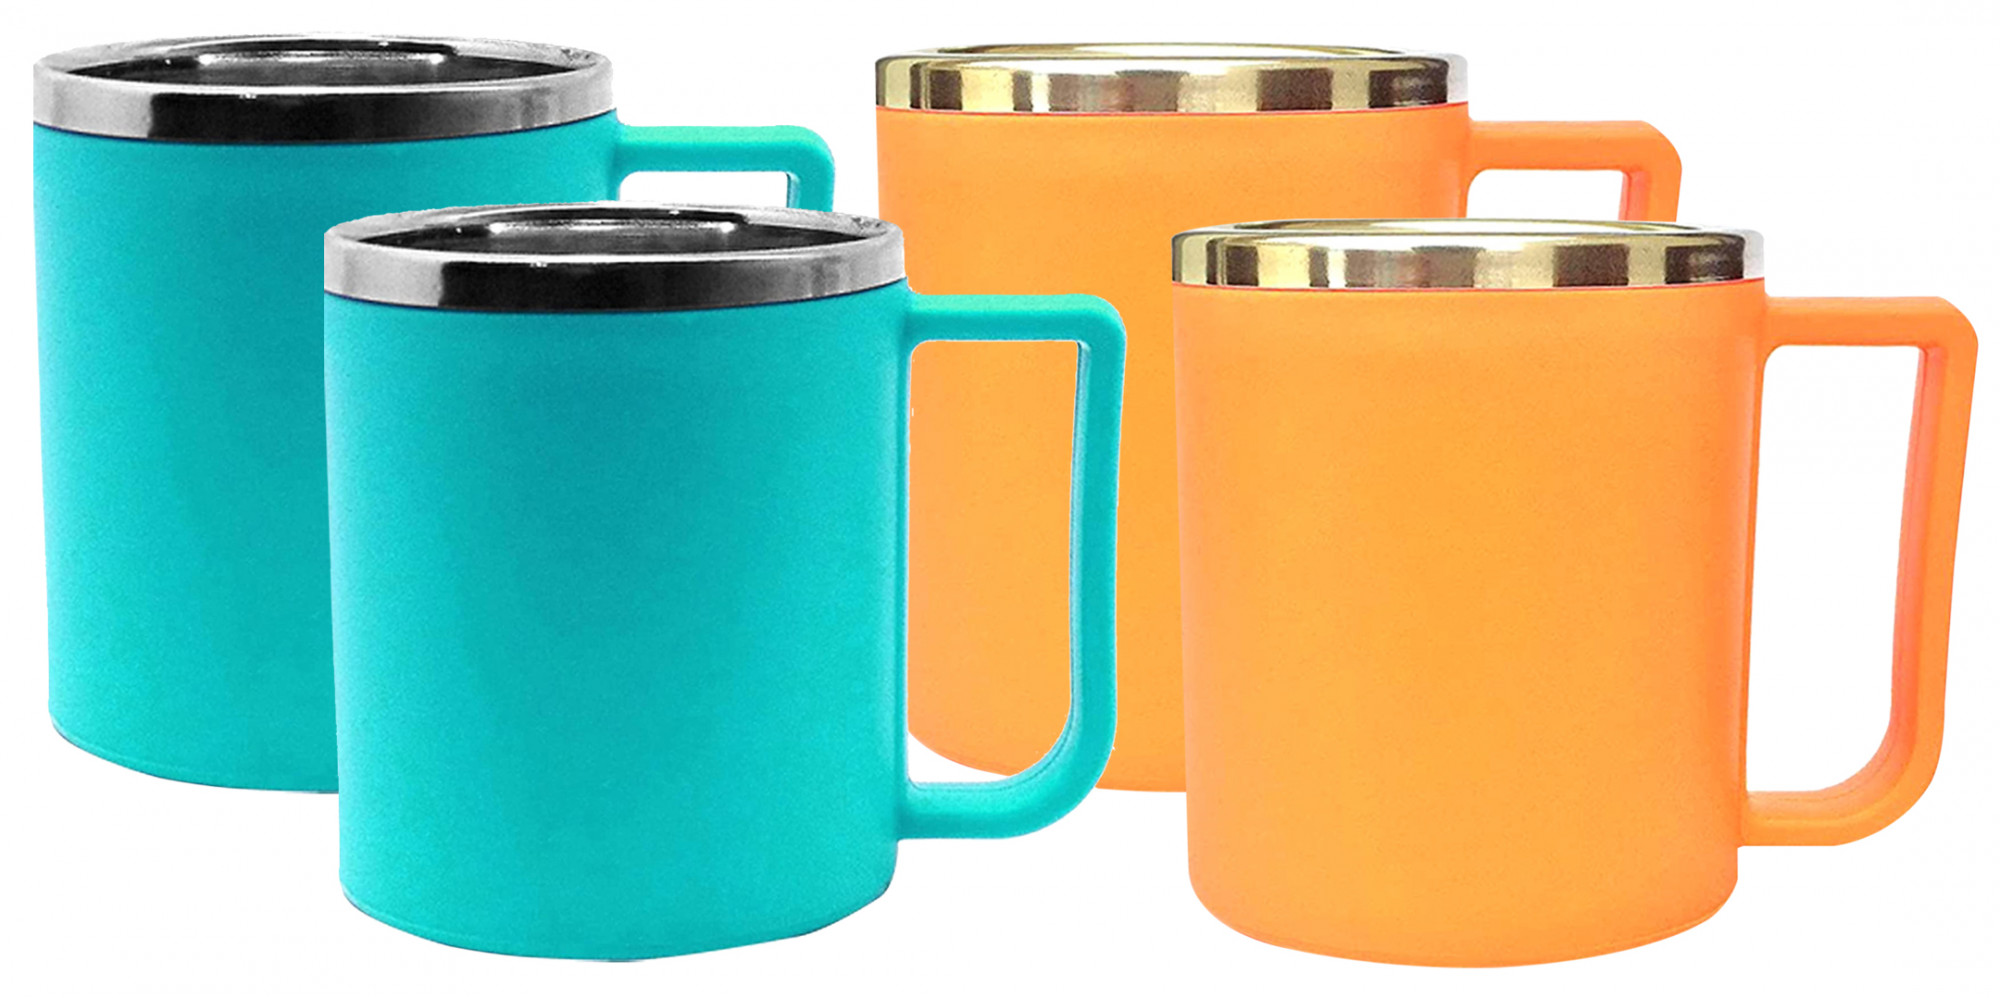 Kuber Industries Medium Size Plastic Steel Cups for Coffee Tea Cocoa, Camping Mugs with Handle, Portable & Easy Clean,(Green & Orange)